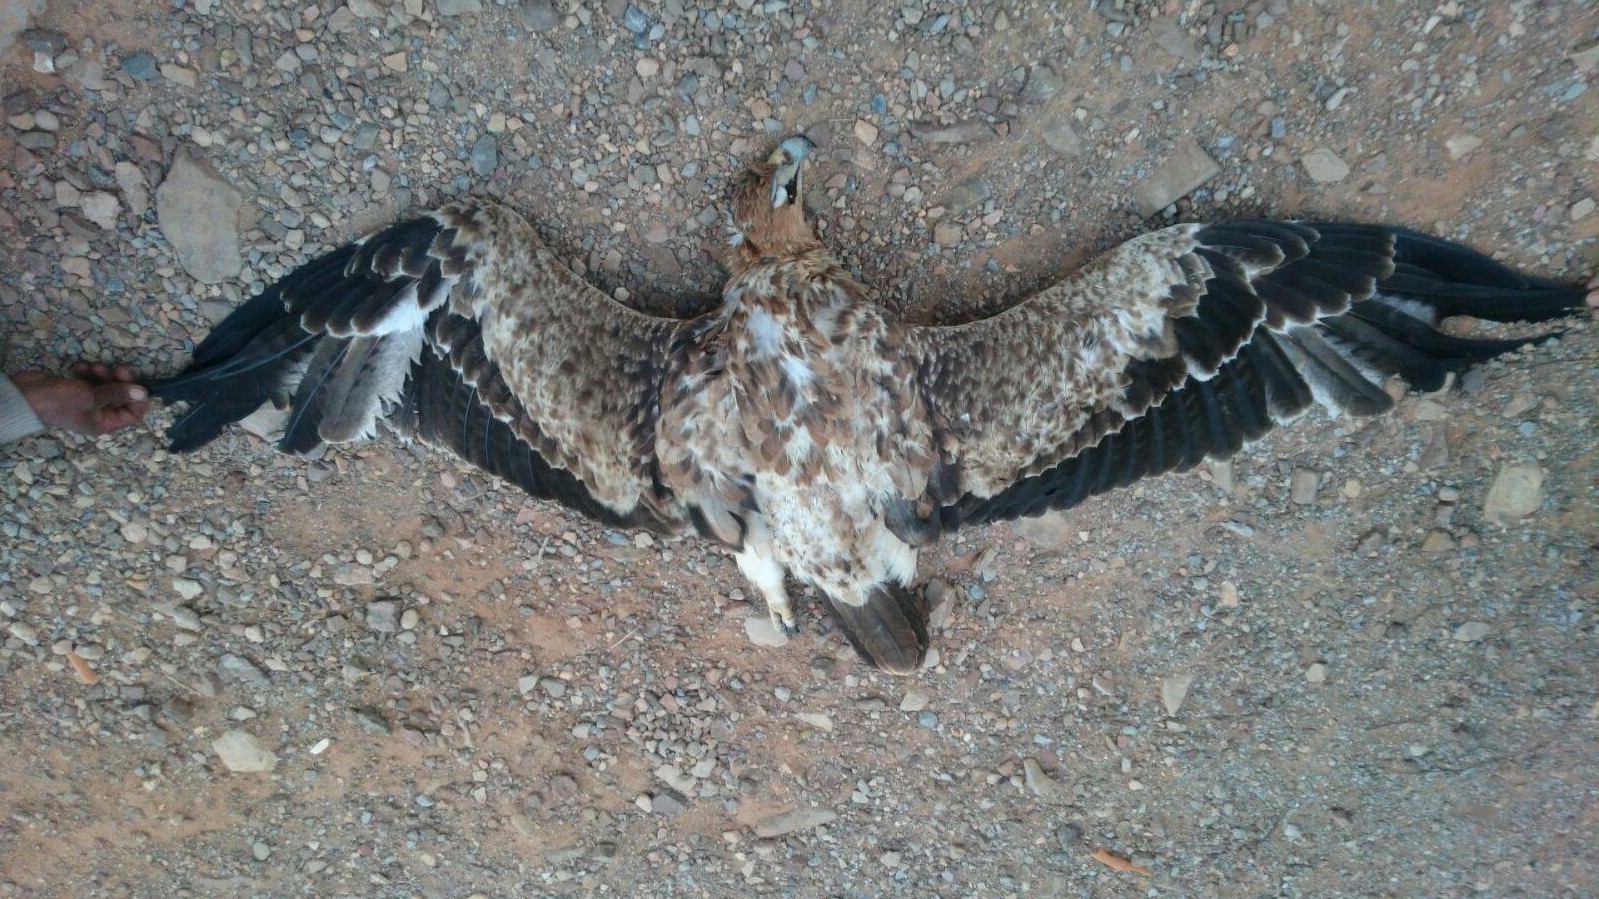 Three-year old Spanish Imperial Eagle (Aquila adalberti) found electrocuted in the Guelmim area on 5 March 2016 by Houssien Kharraz.